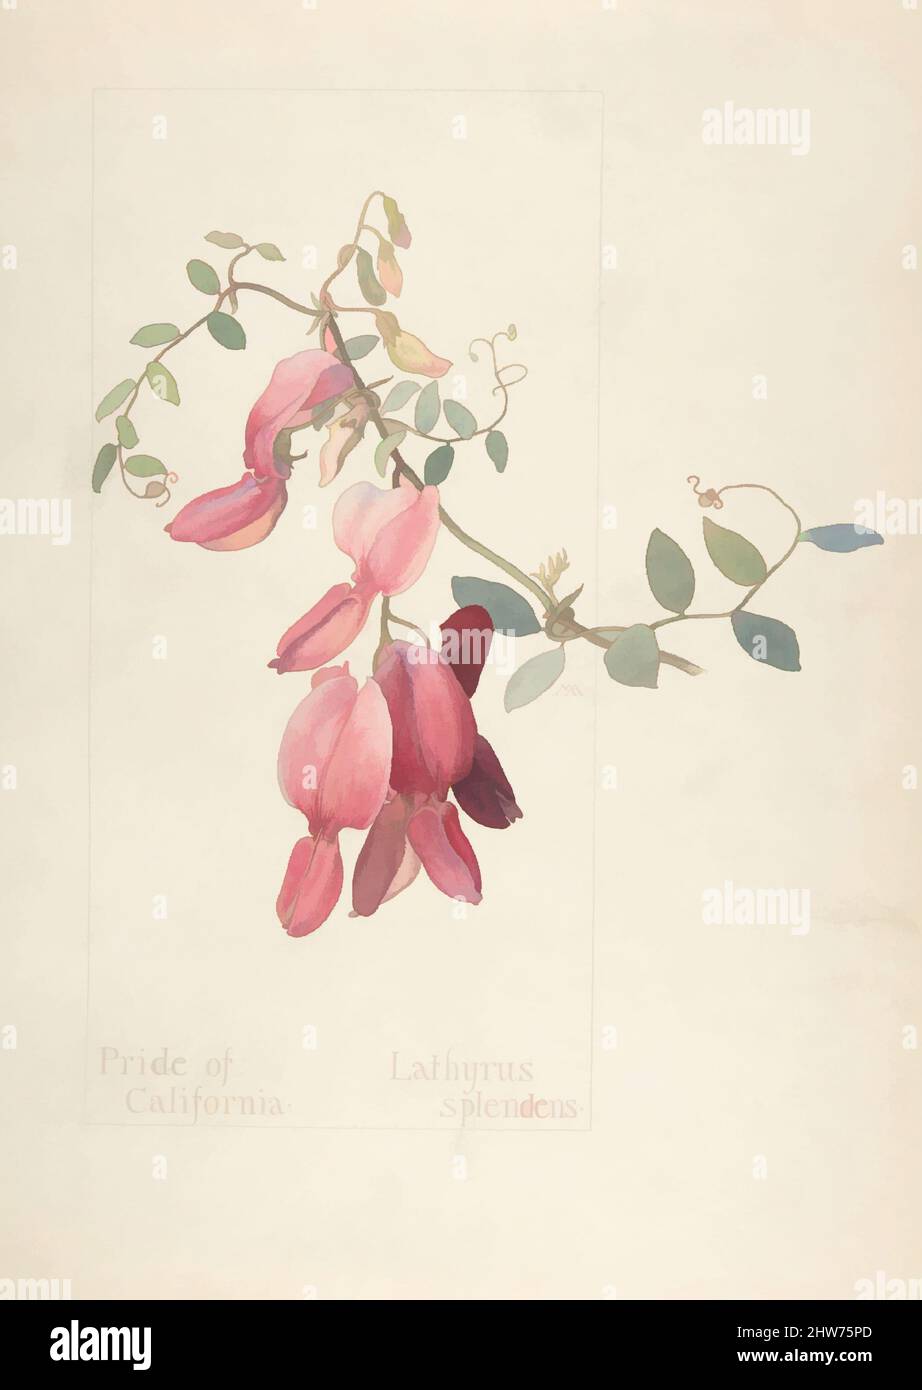 Art inspired by Pride of California, Lathyrus Splendens, April 10, 1914, Watercolor and brown ink over graphite, with page design indicated in graphite, sheet: 13 11/16 x 9 15/16 in. (34.8 x 25.2 cm), Drawings, Margaret Neilson Armstrong (American, New York 1867–1944 New York, Classic works modernized by Artotop with a splash of modernity. Shapes, color and value, eye-catching visual impact on art. Emotions through freedom of artworks in a contemporary way. A timeless message pursuing a wildly creative new direction. Artists turning to the digital medium and creating the Artotop NFT Stock Photo